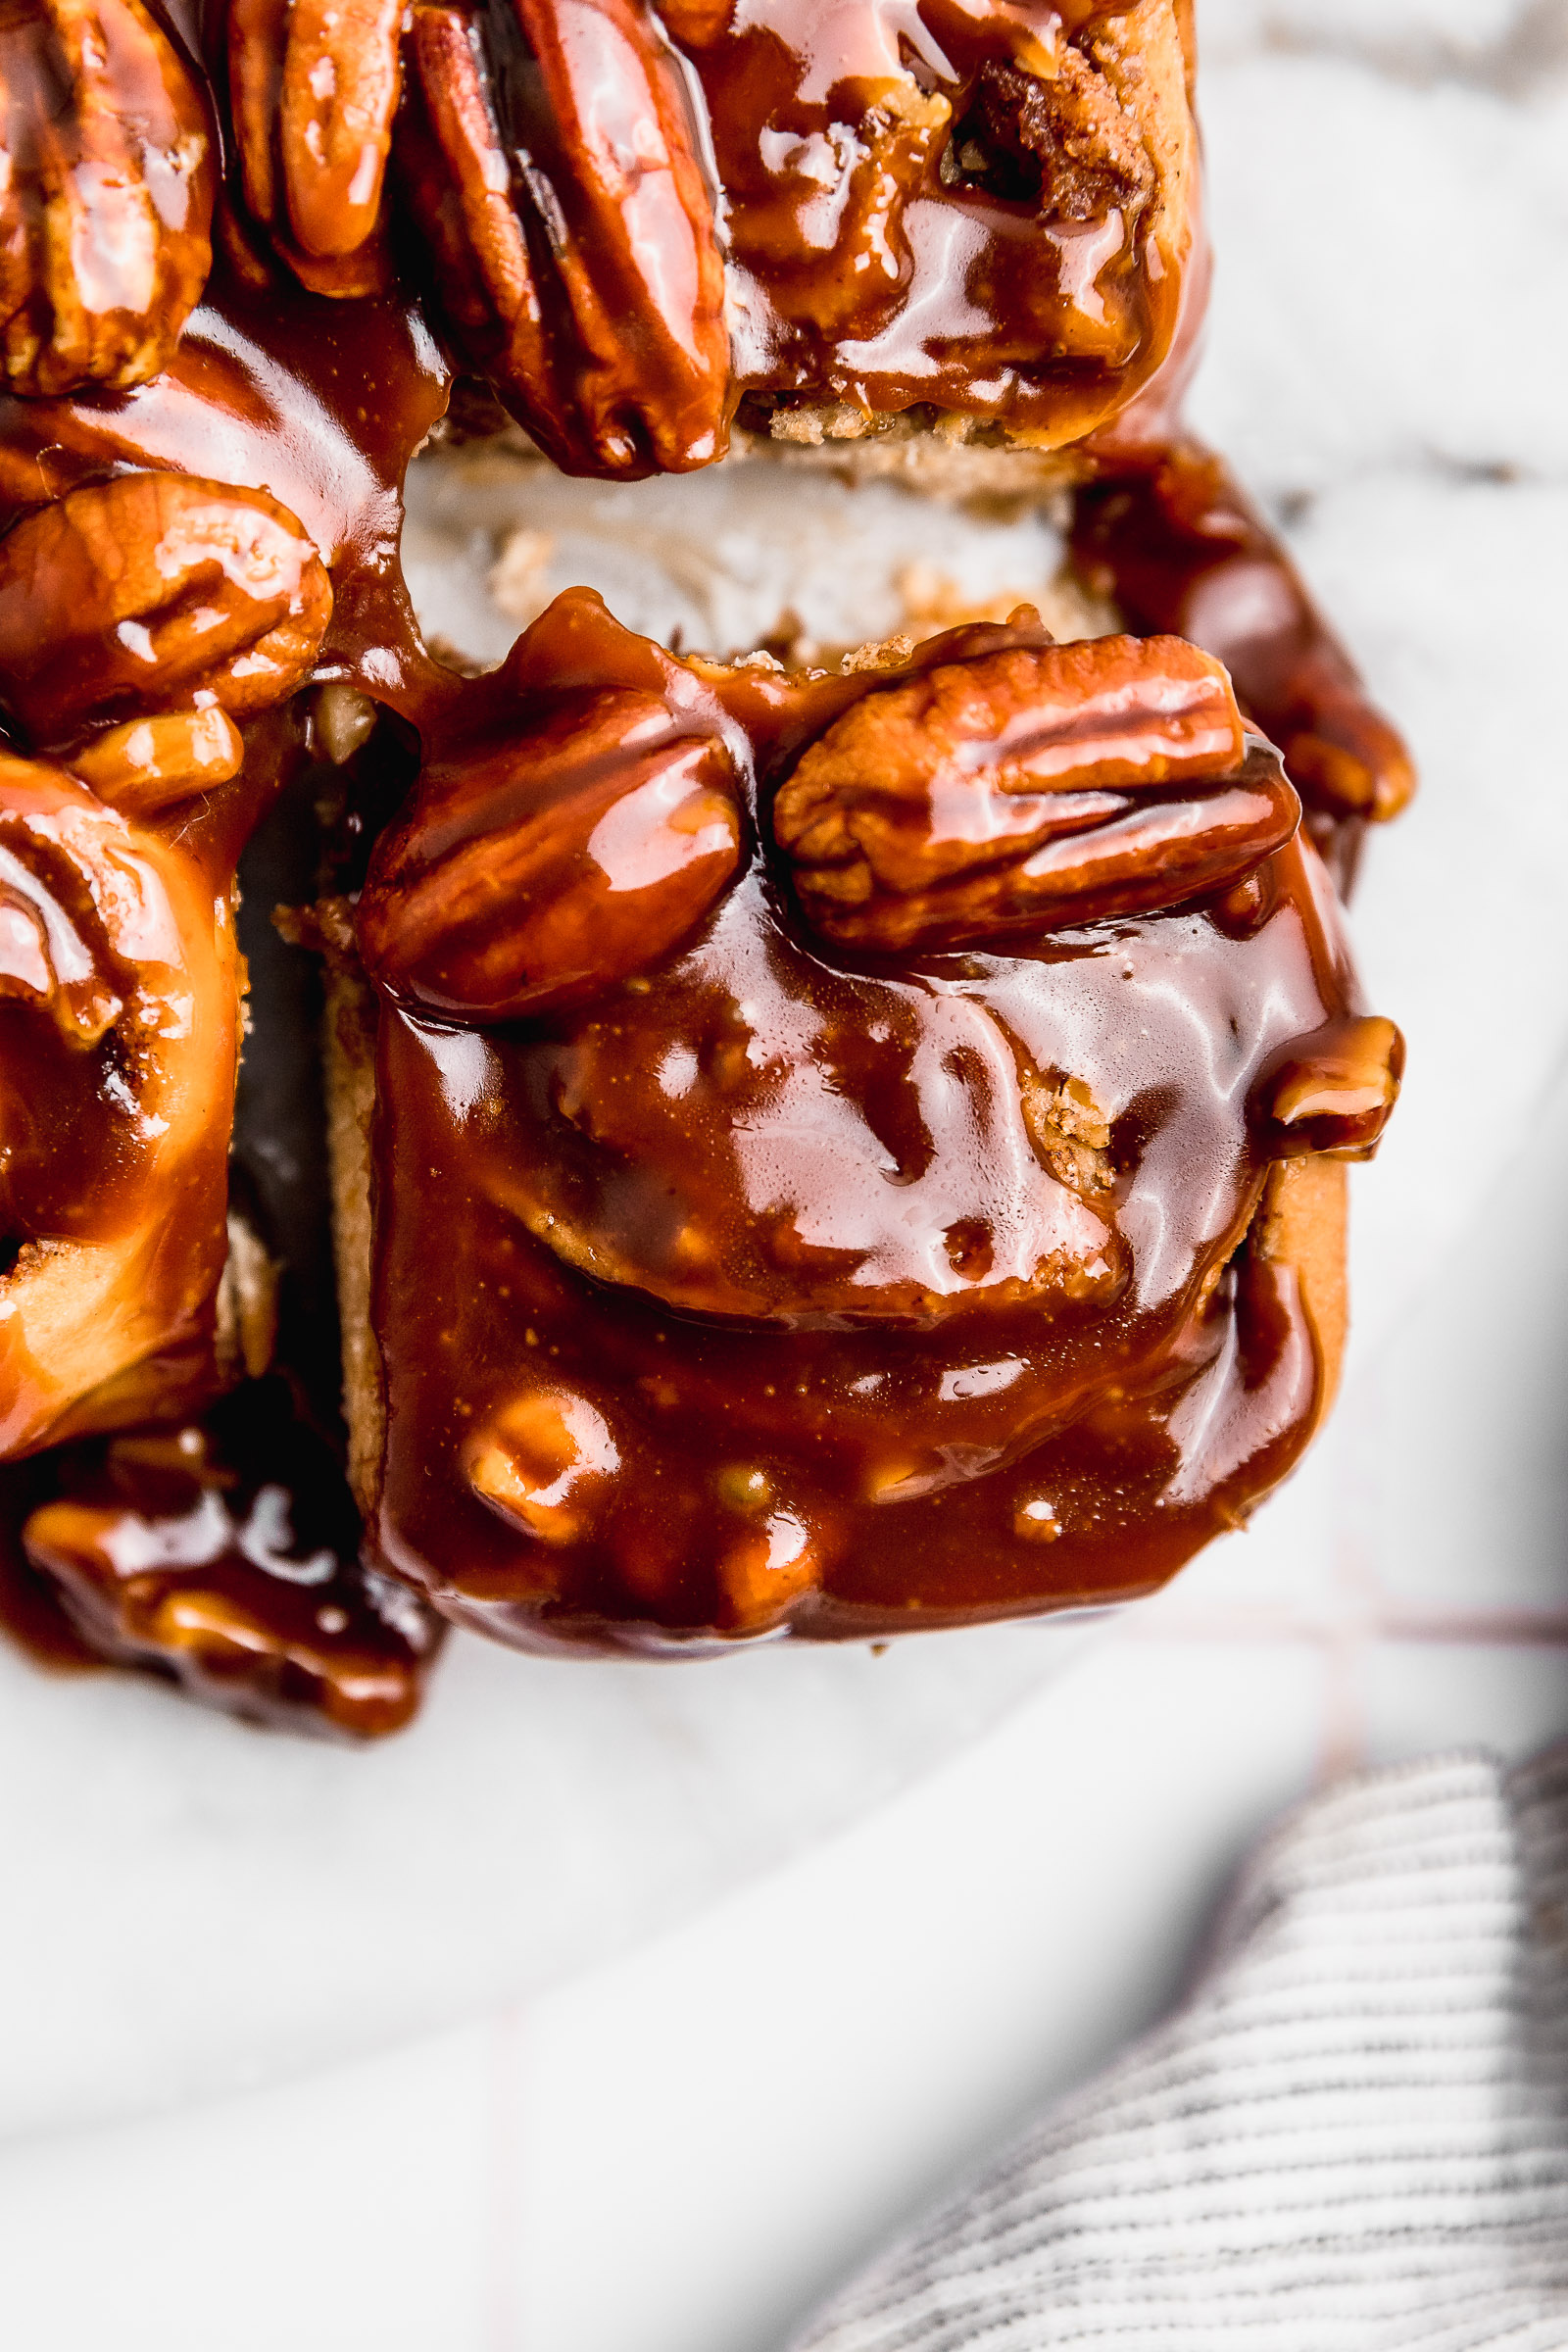 Closeup of a Caramel Pecan Cinnamon Roll, with that shiny sauce on top and you can see the whole pecans as well. It's being pulled apart from the rest of the sticky buns.